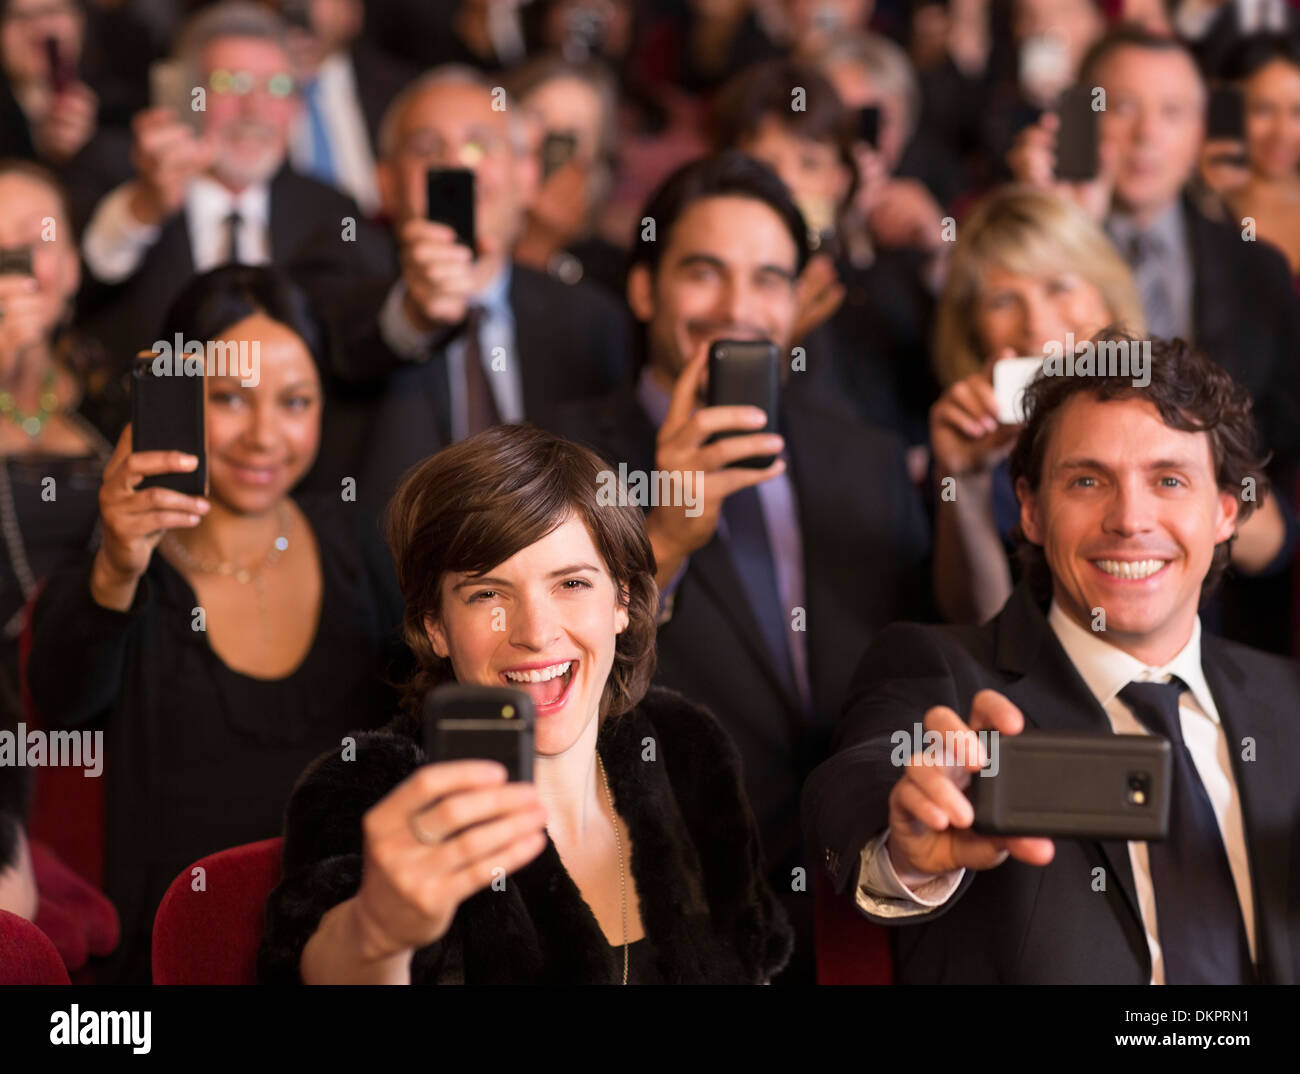 Enthusiastic theater audience videoing performance with smart phones Stock Photo